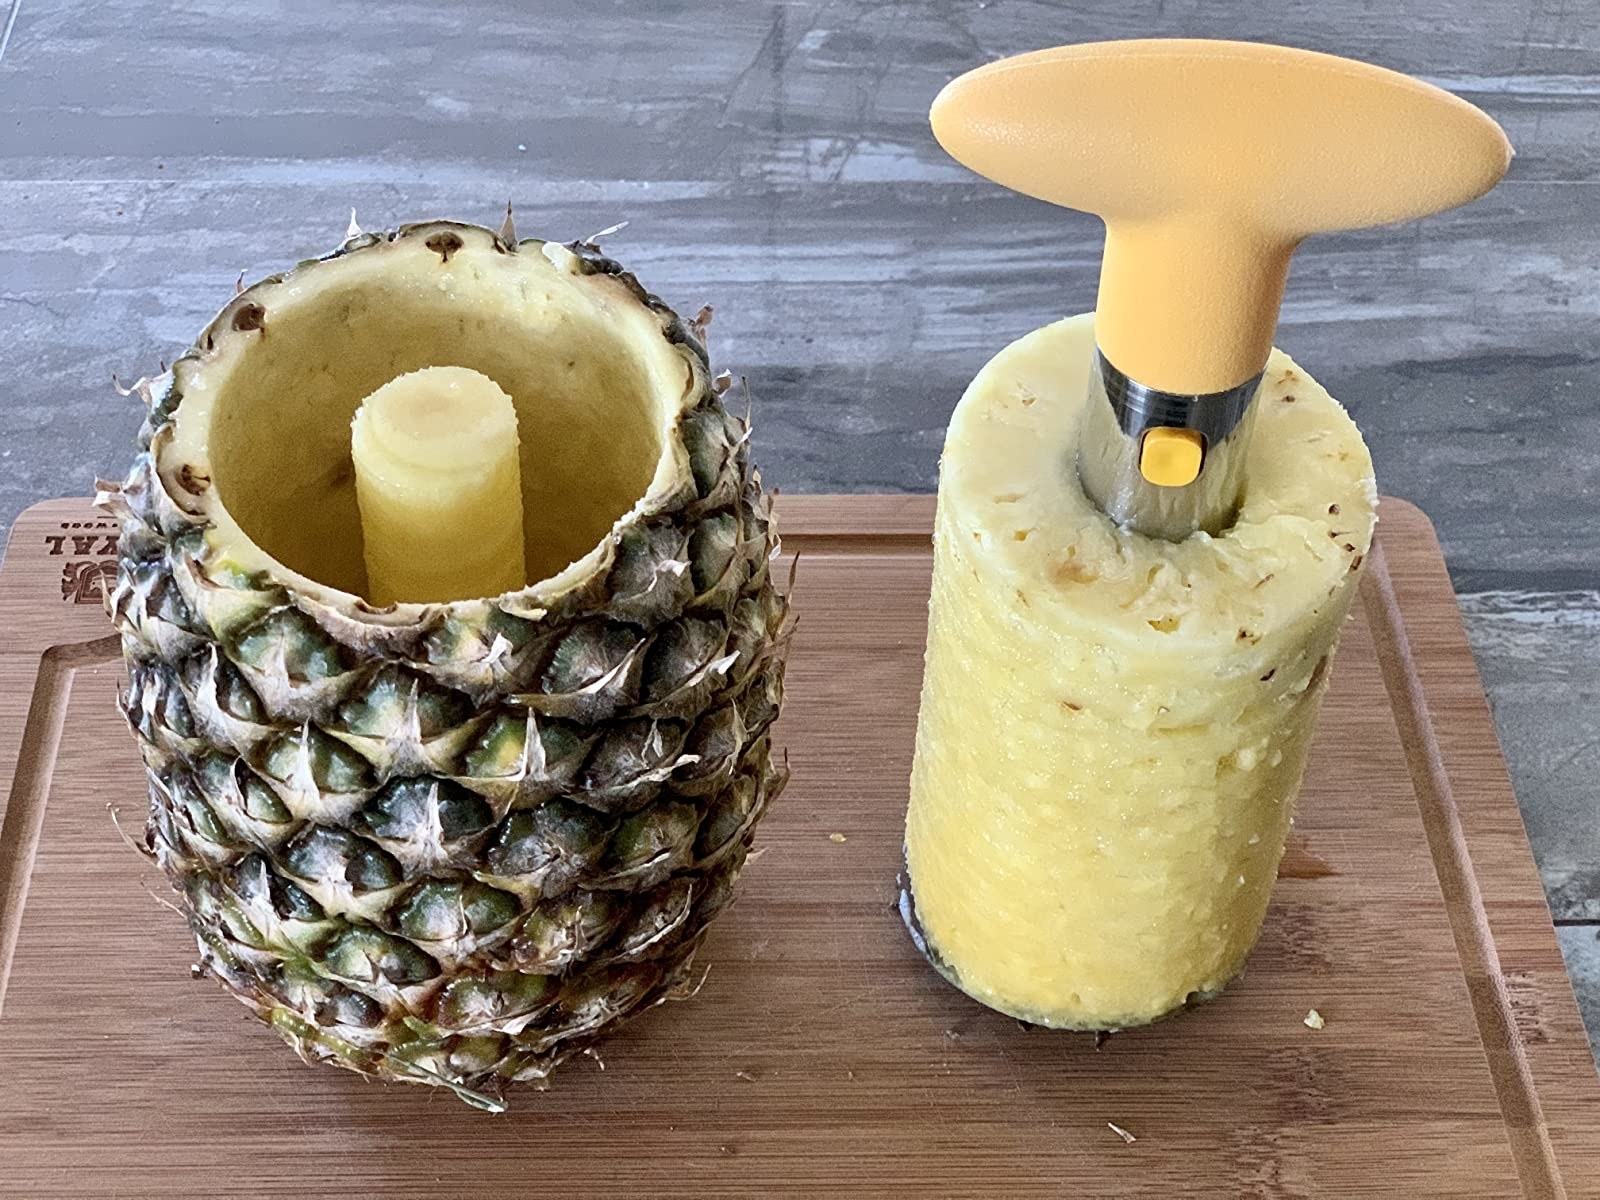 a reviewer photo of a recently cored pineapple